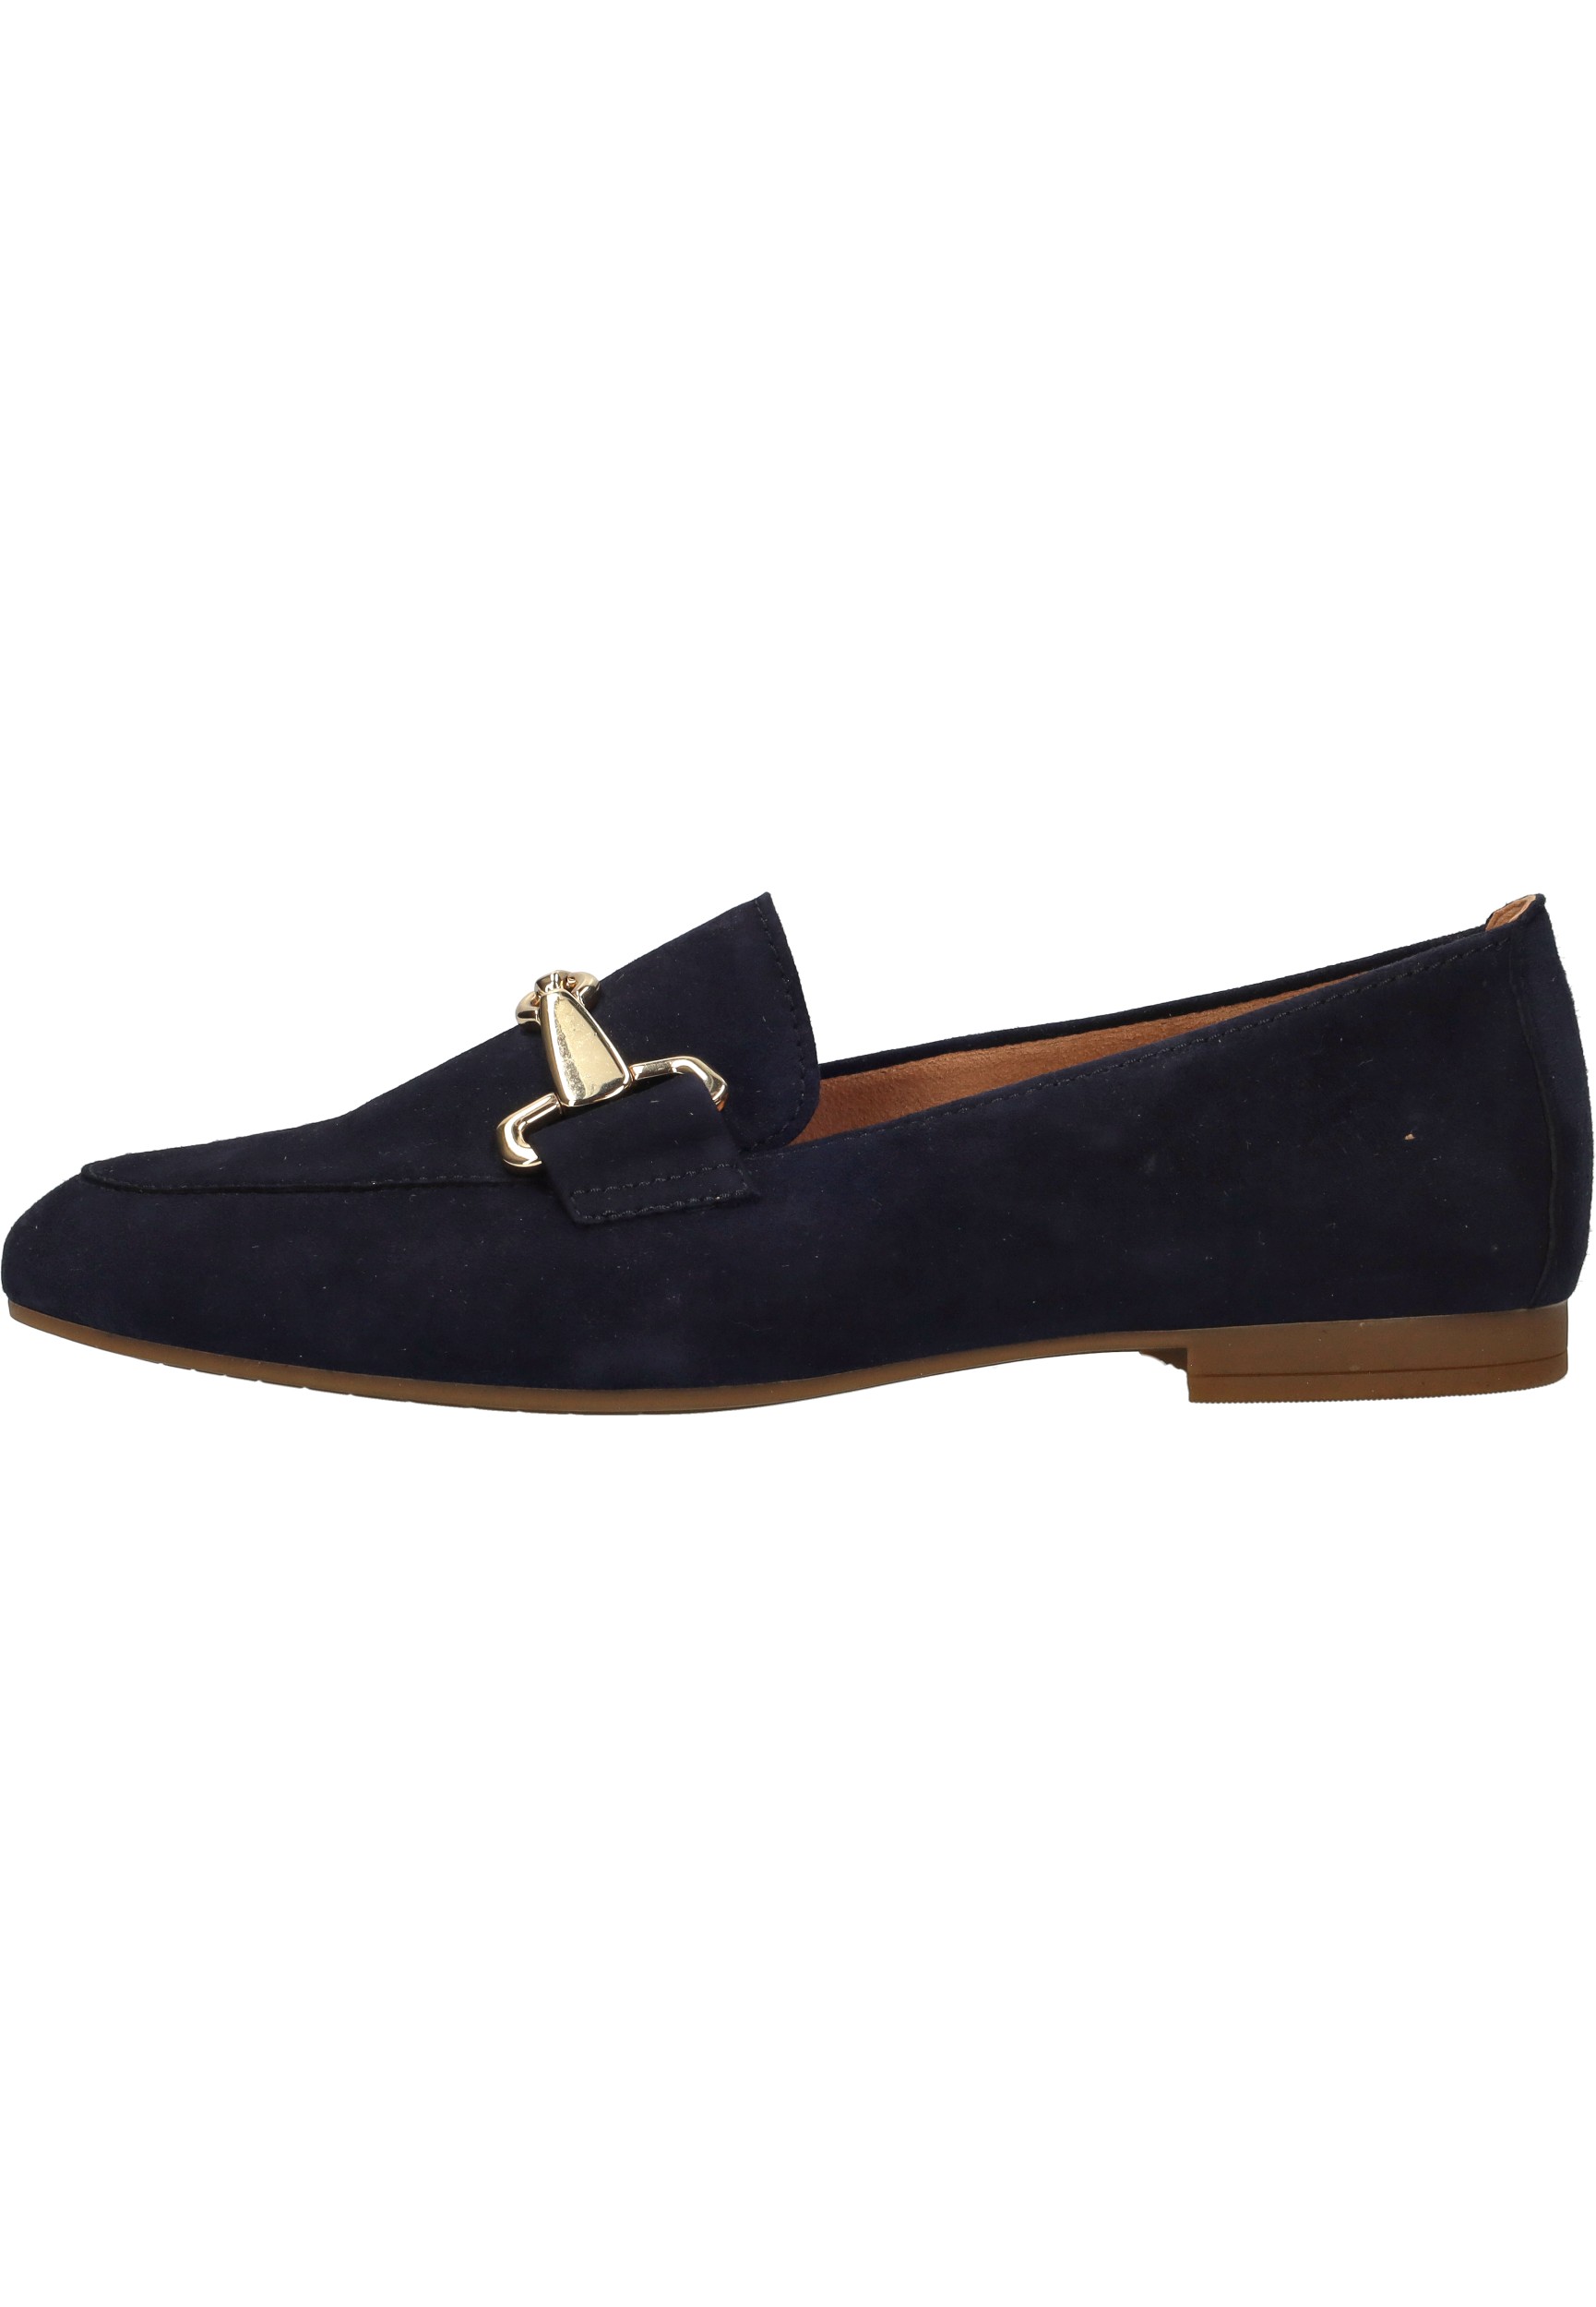 Gabor dames loafer - Donkerblauw - Maat 41